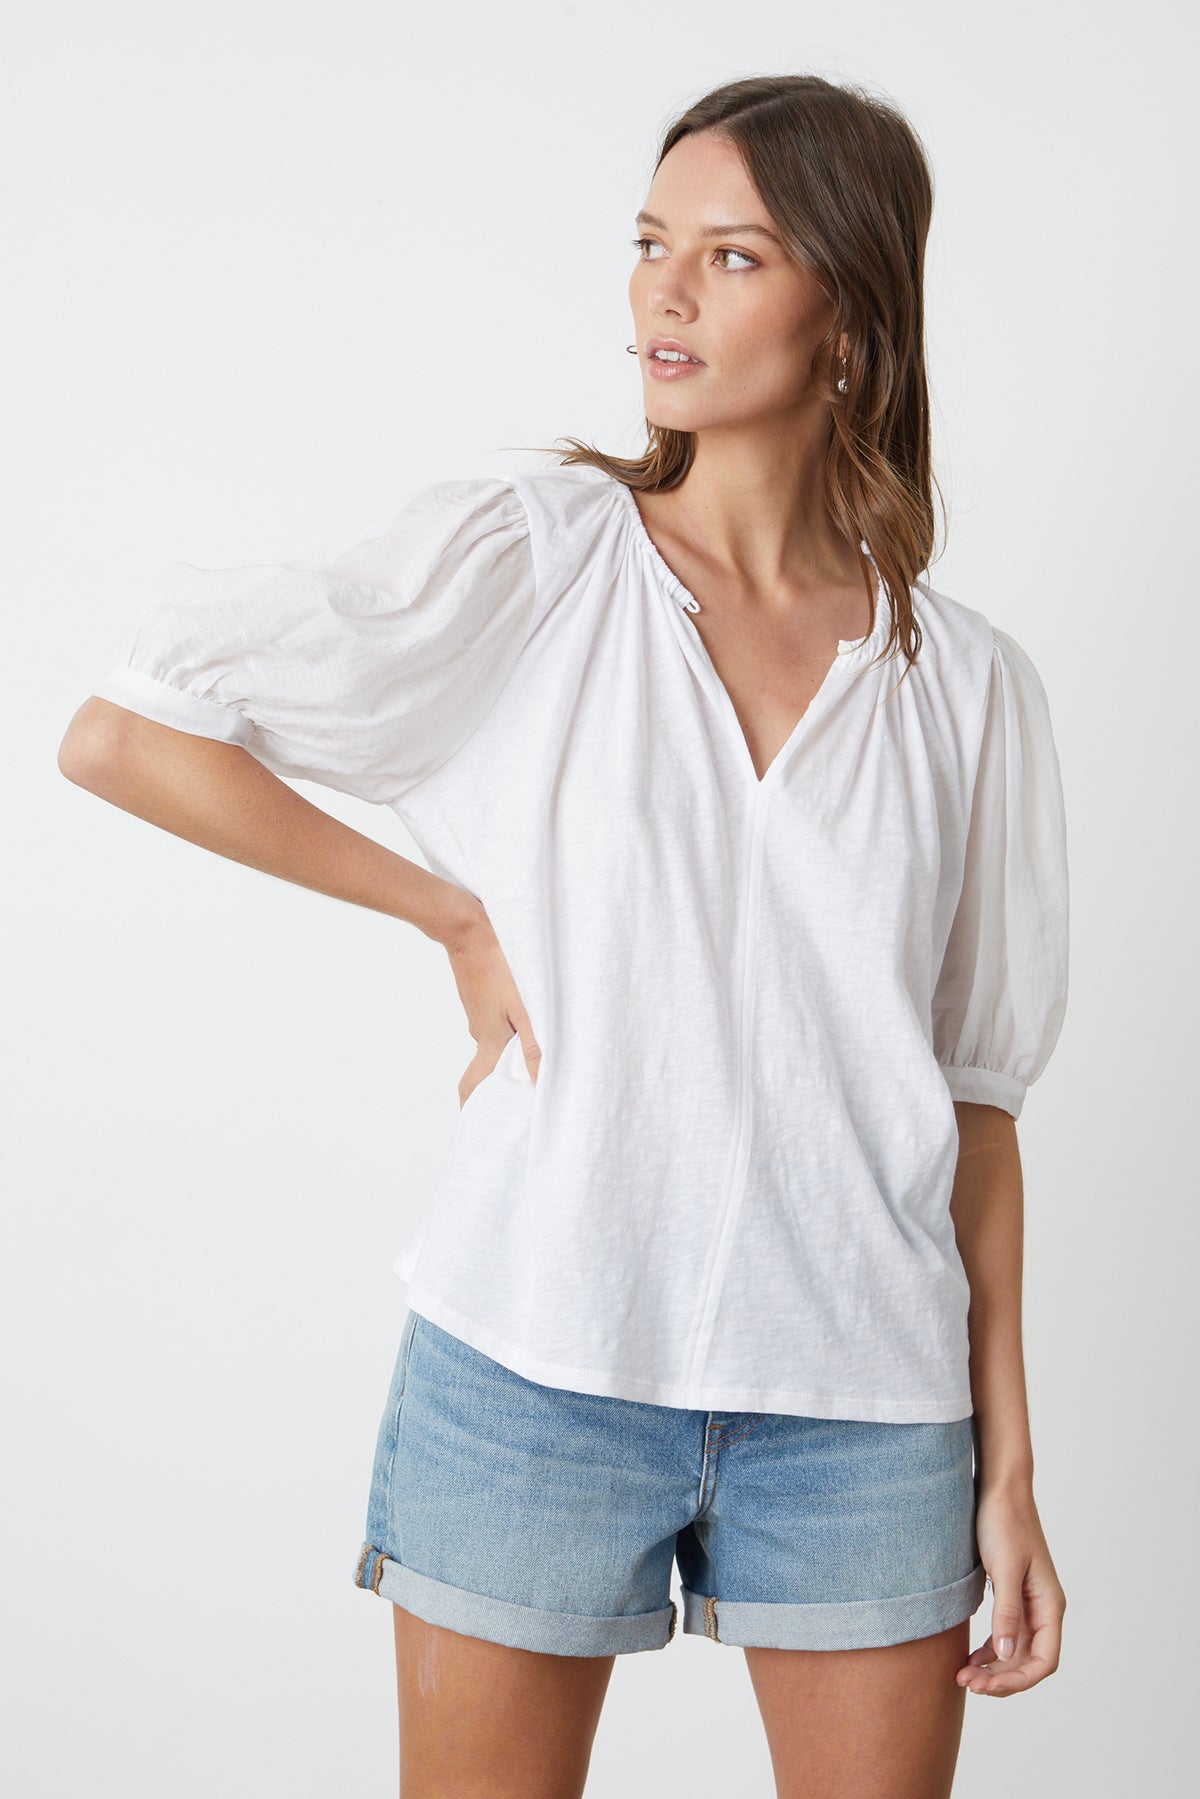 Mallory Top in white with puff sleeves paired with blue denim shorts front-26255715369153